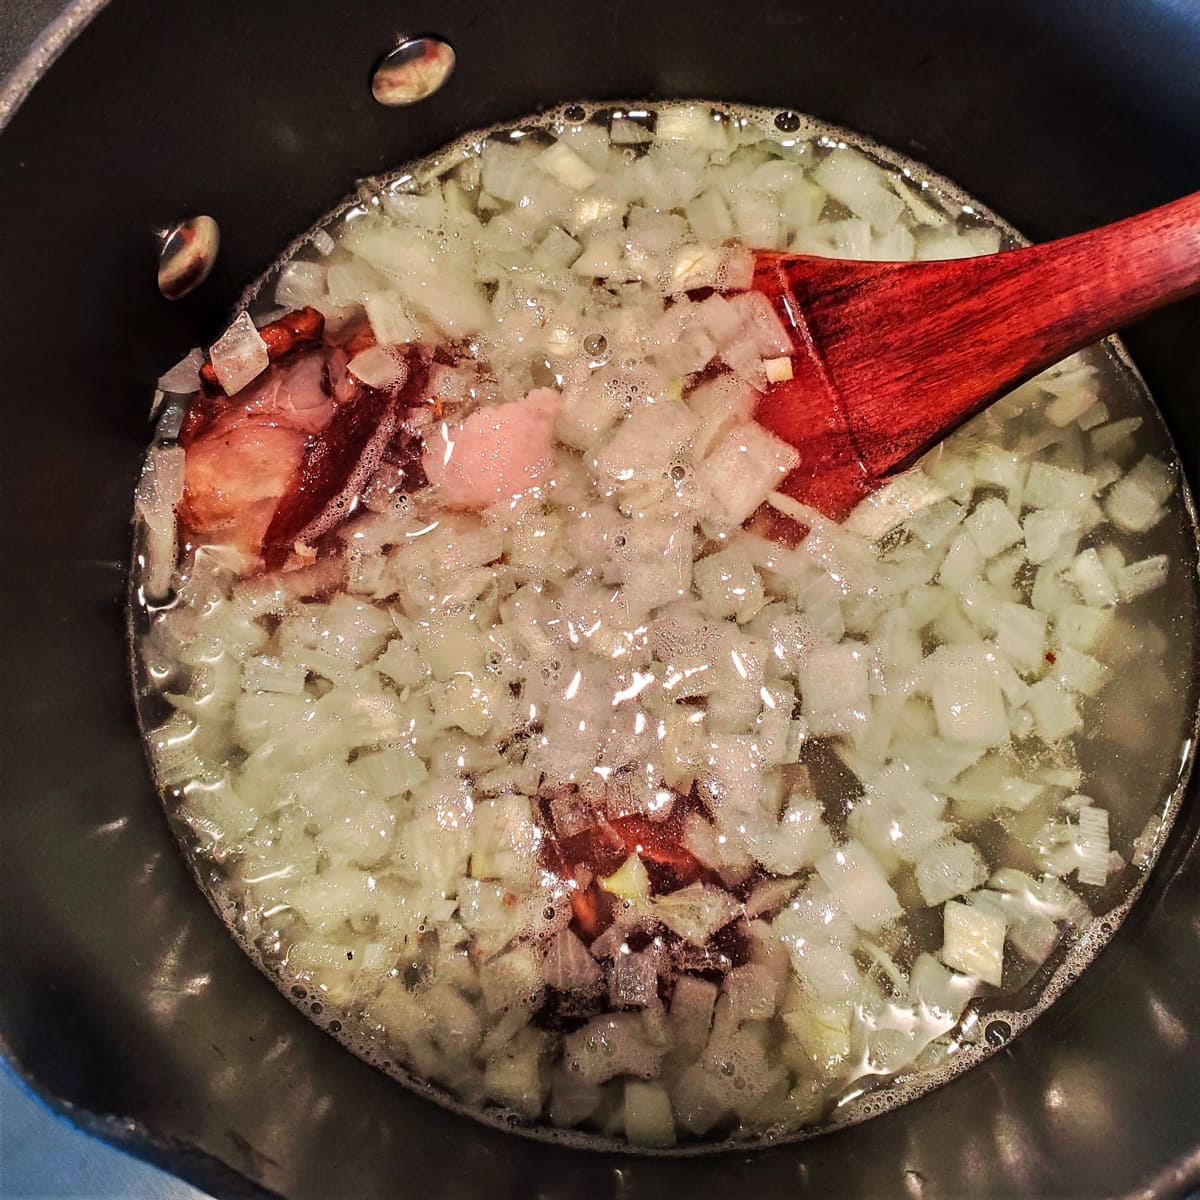 Diced onion and ham hocks simmering in a pot of water.